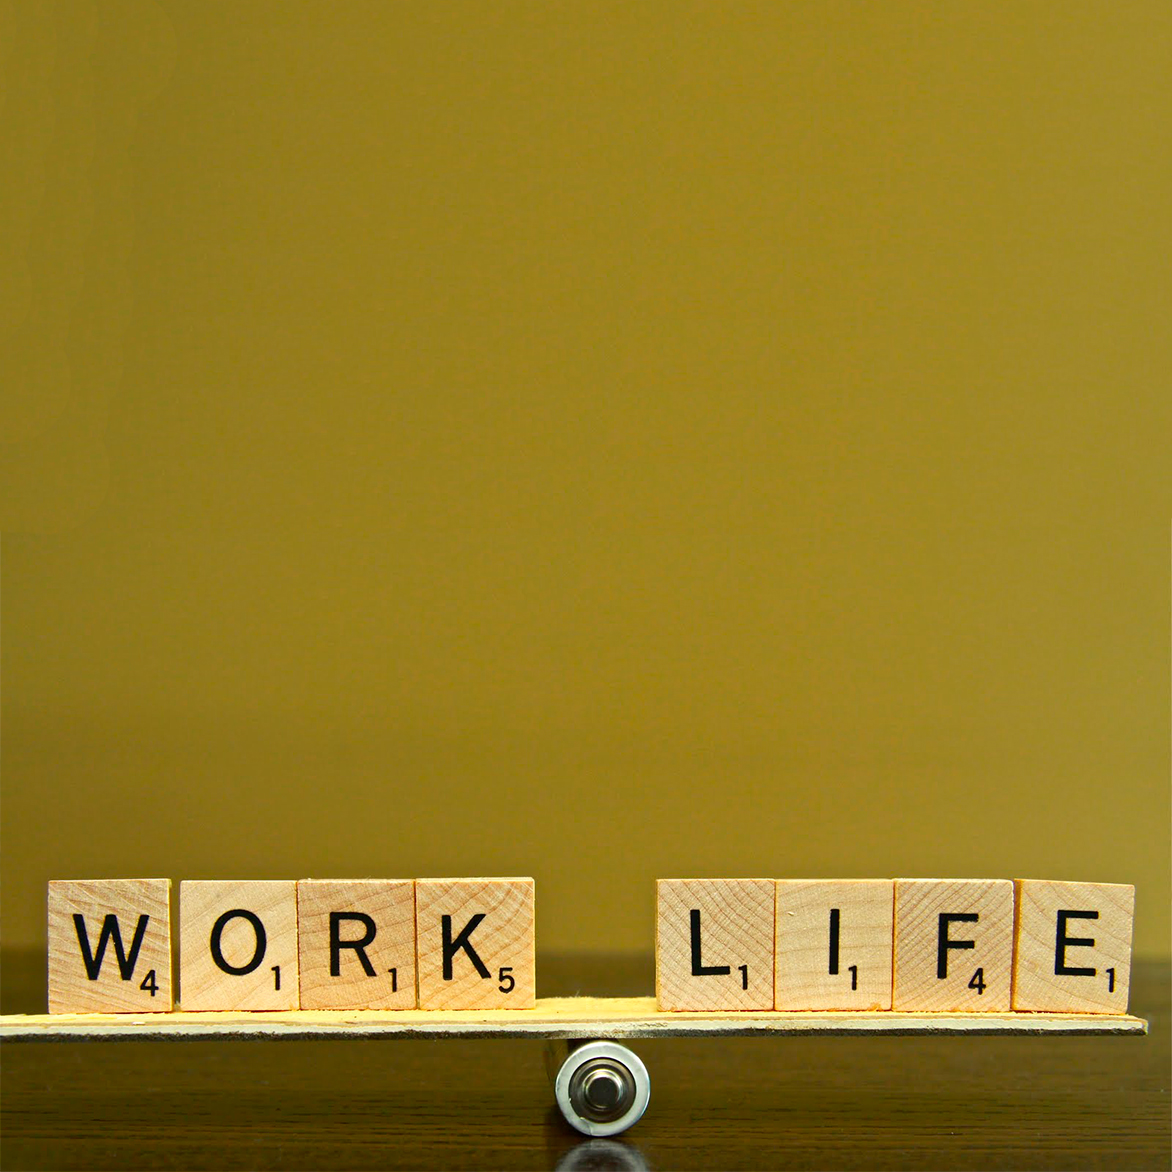 Work life ответы. Pictures about Life. Balance текст.